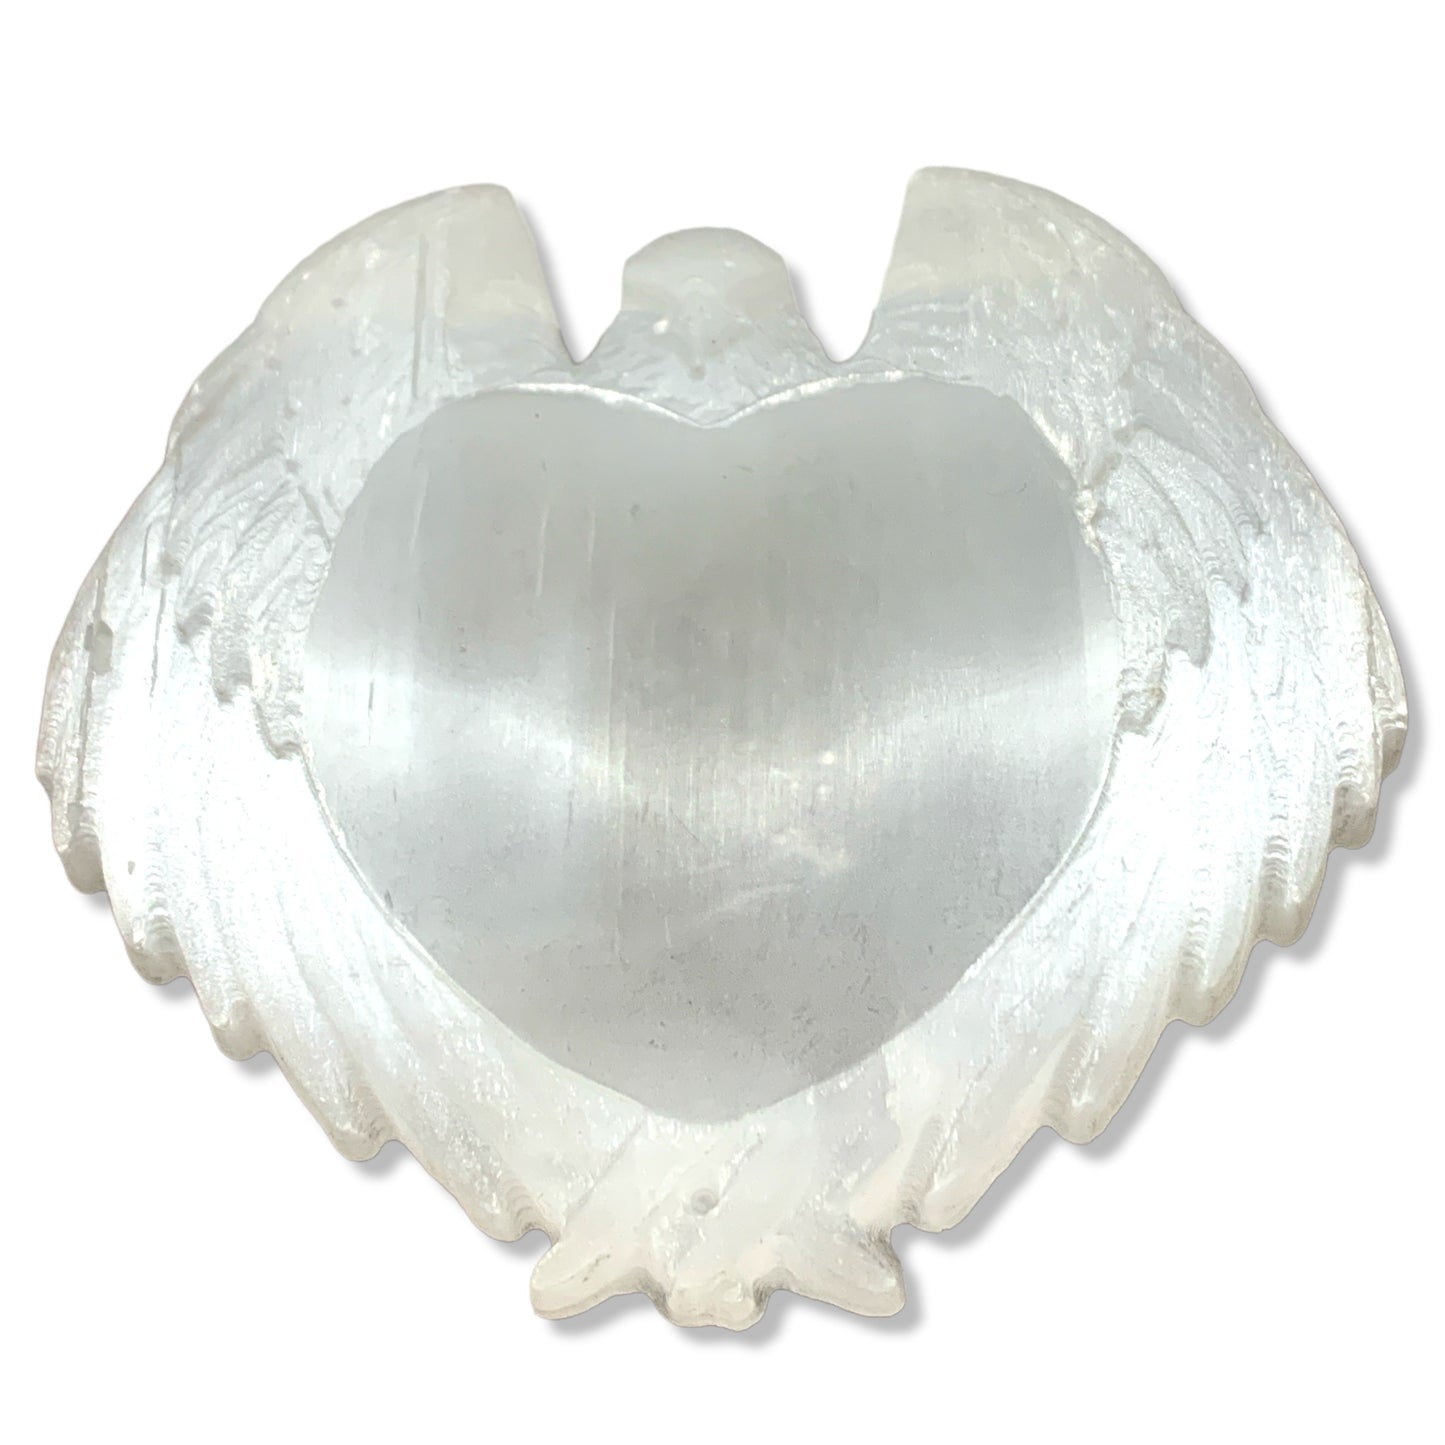 Eagle Bowl - Selenite - 4" - Hand Carved - China - NEW922